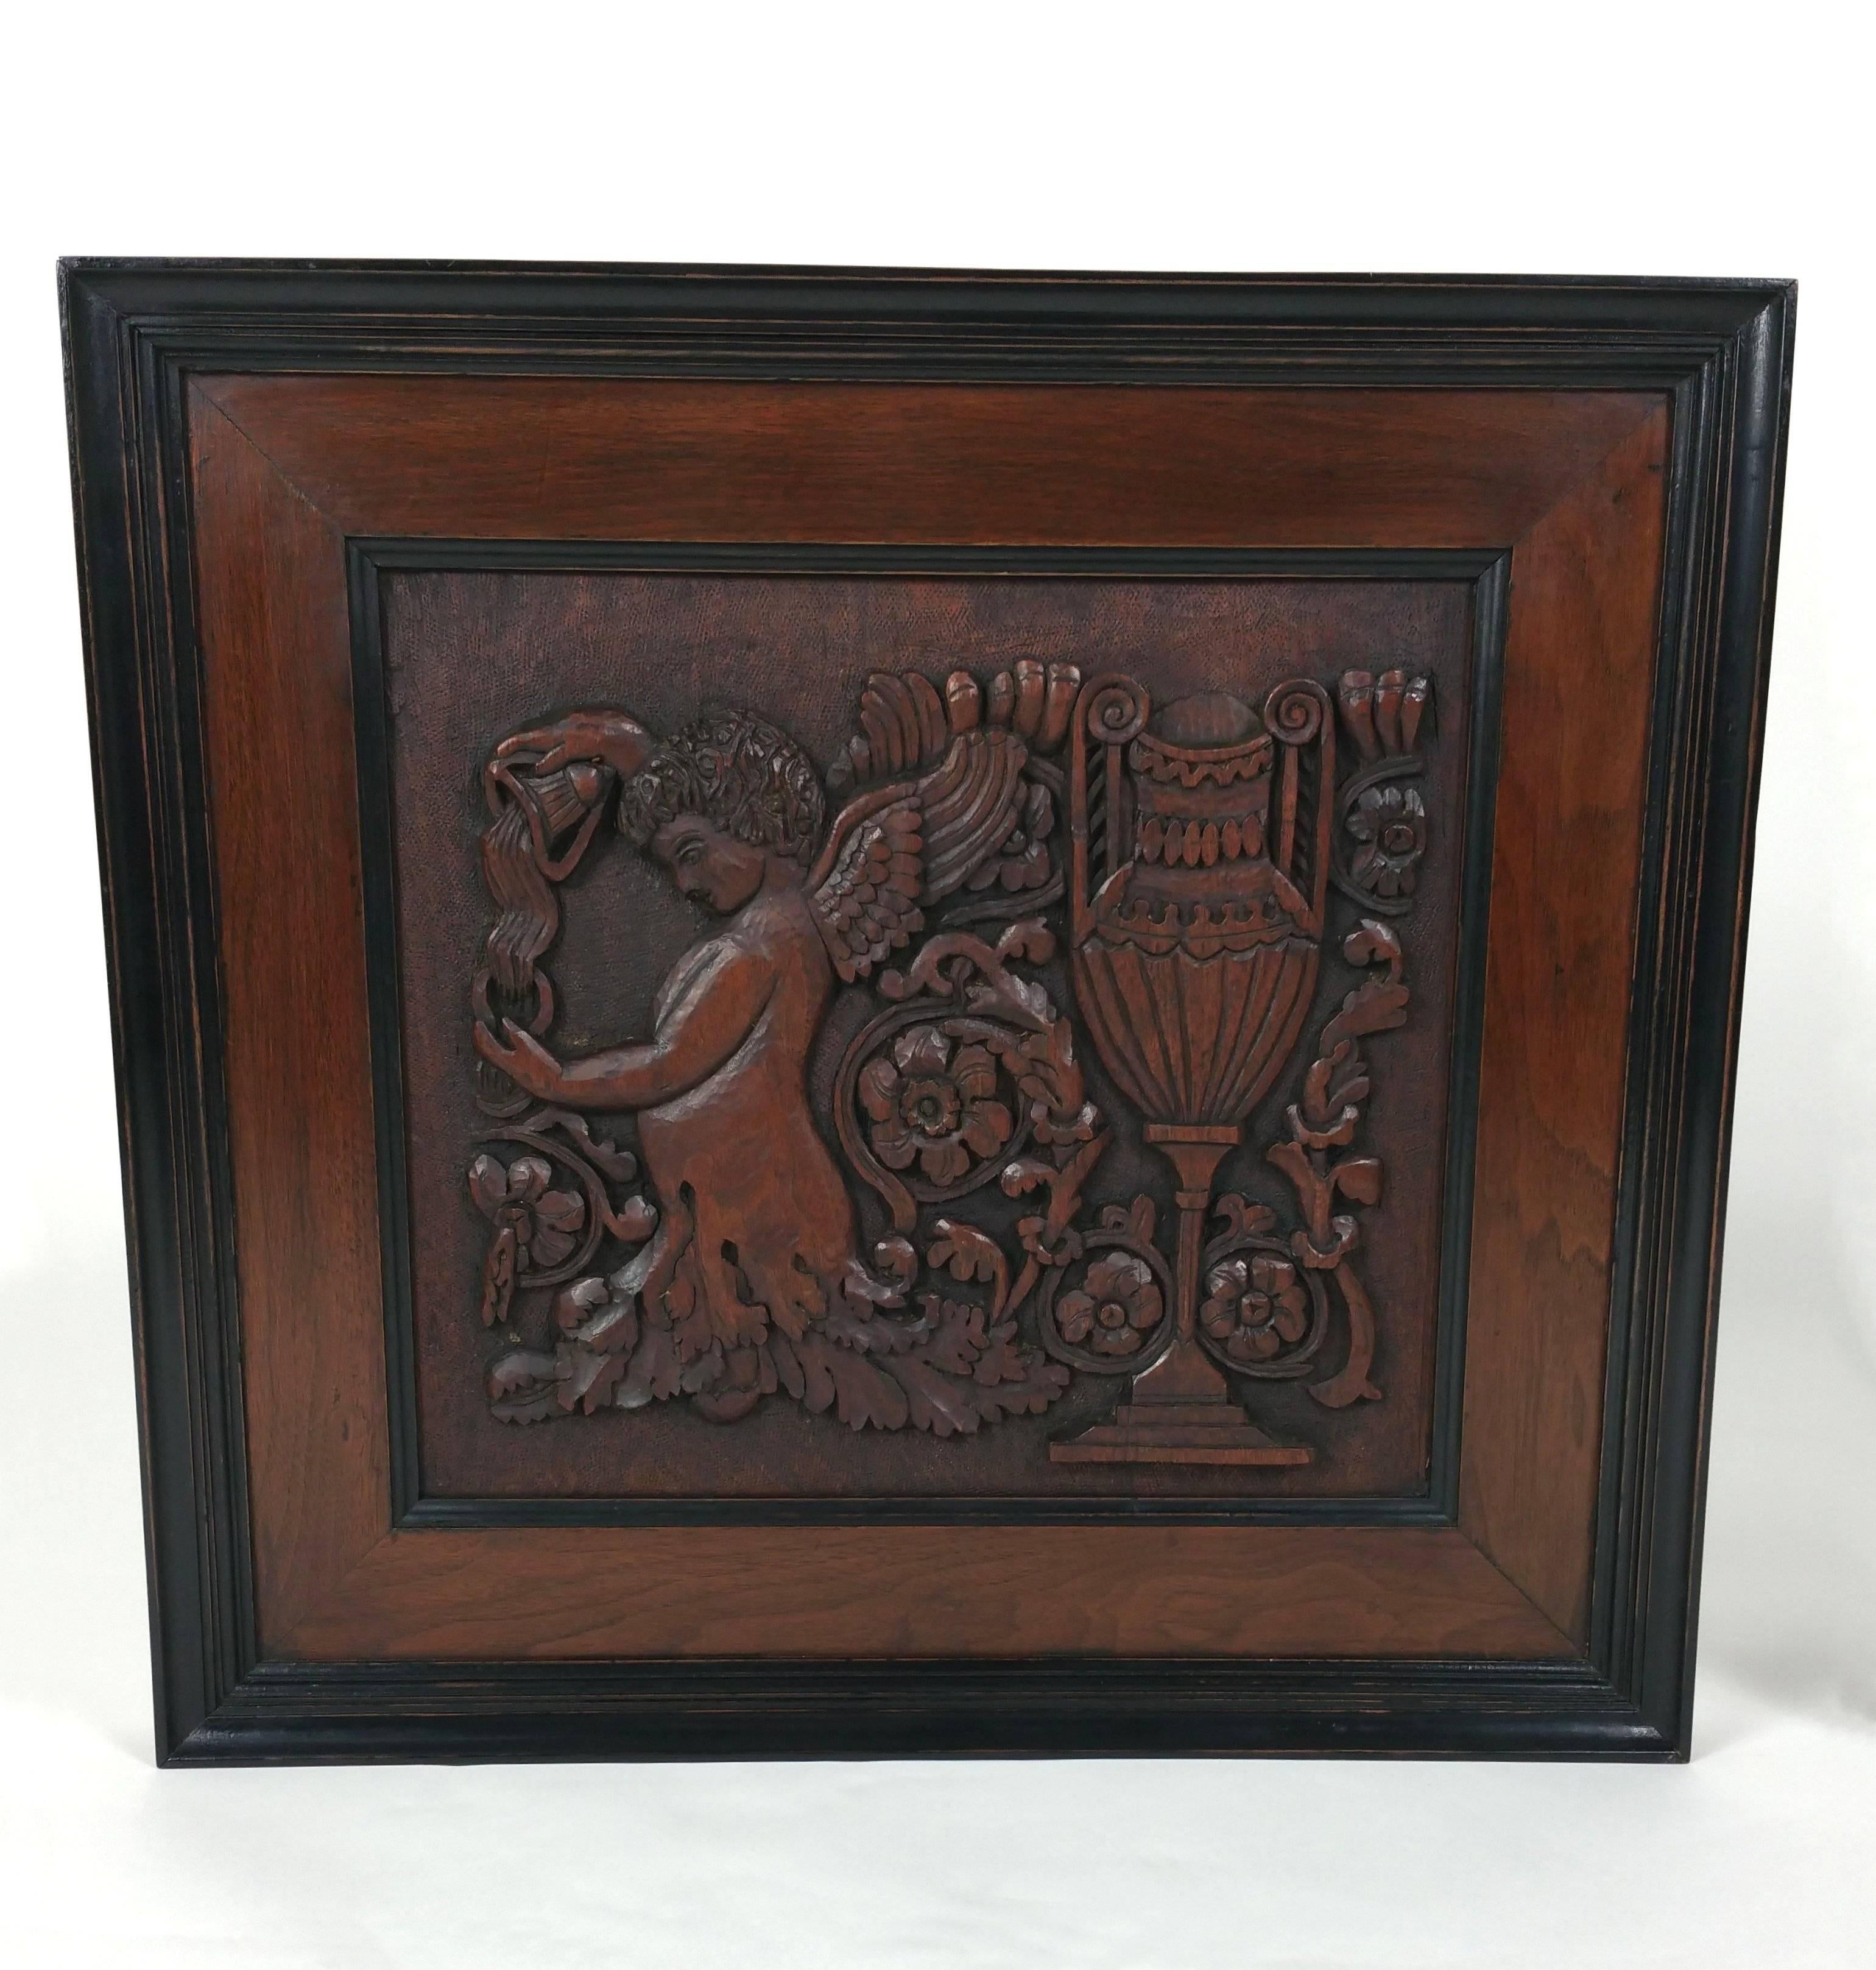 This lovely pair of 19th century carved walnut framed panels depicts classical urns and winged cherubs pouring from vessels, against a background of ferns and flowers. It bears a label on the back inscribed ‘This was carved by my mother, Eleanor